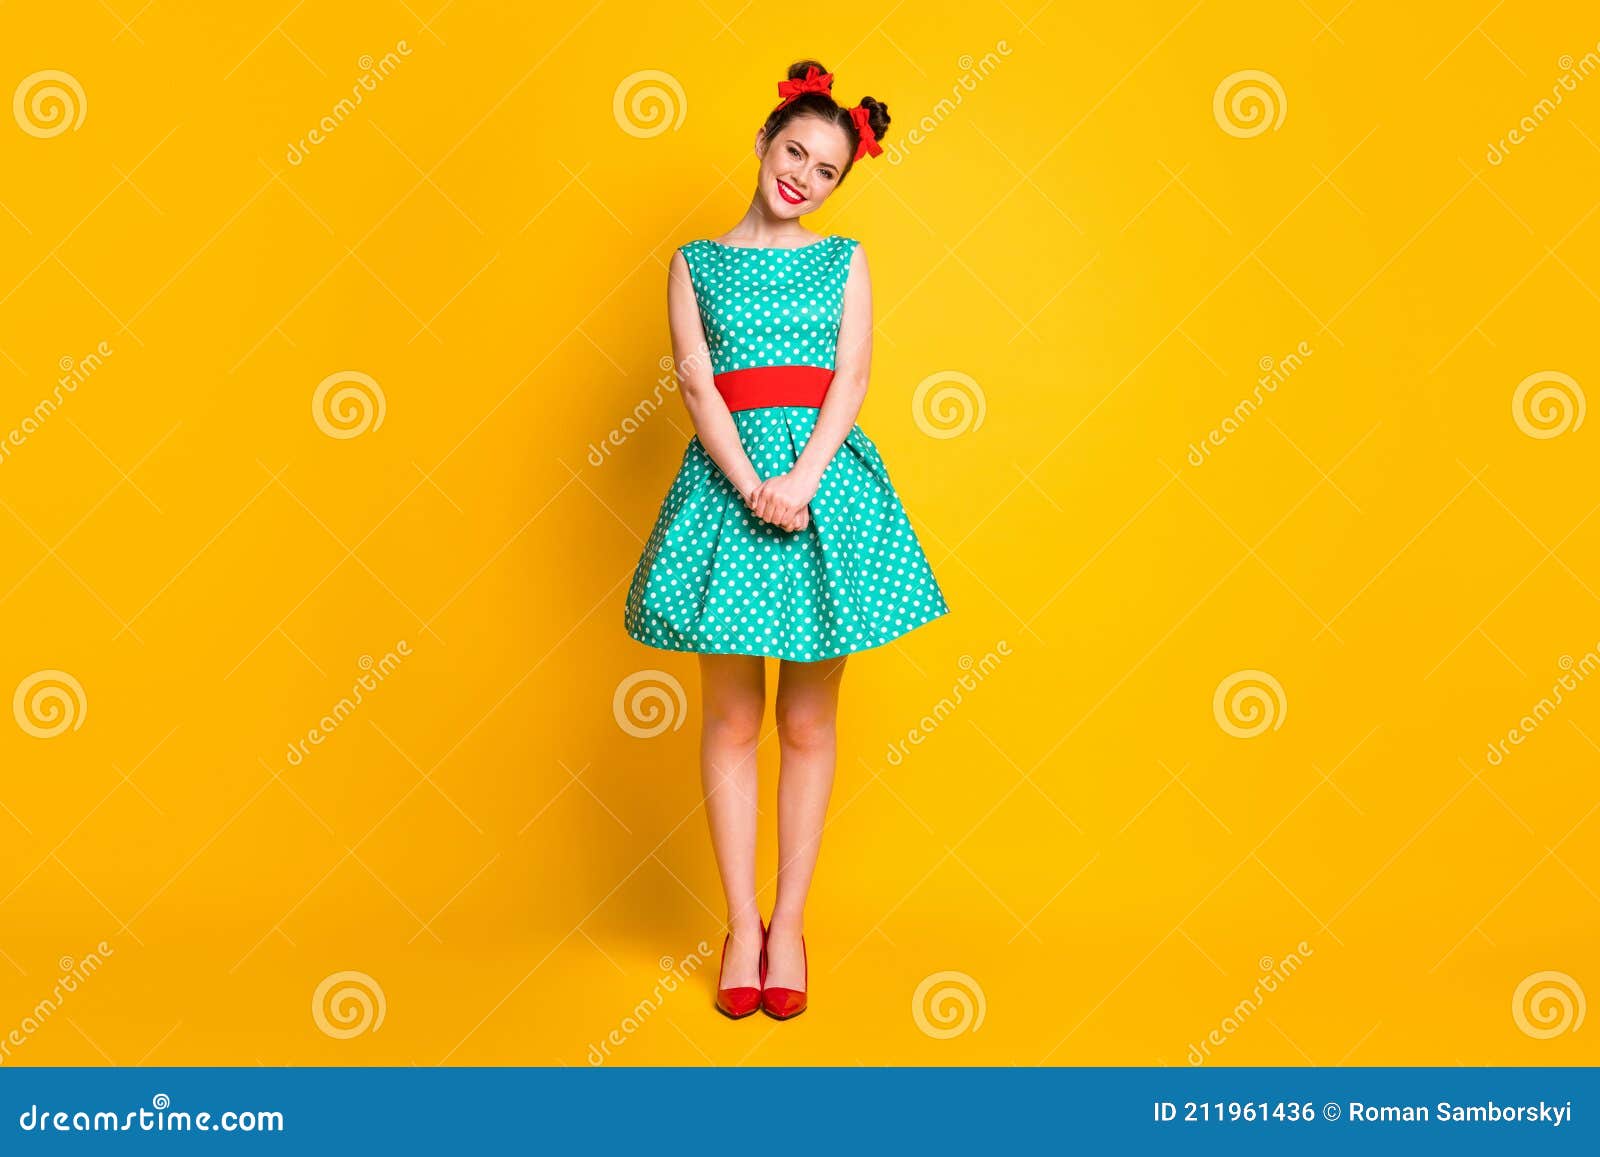 Full Length Body Size View of Charming Cheerful Girl Wearing Teal Dress ...